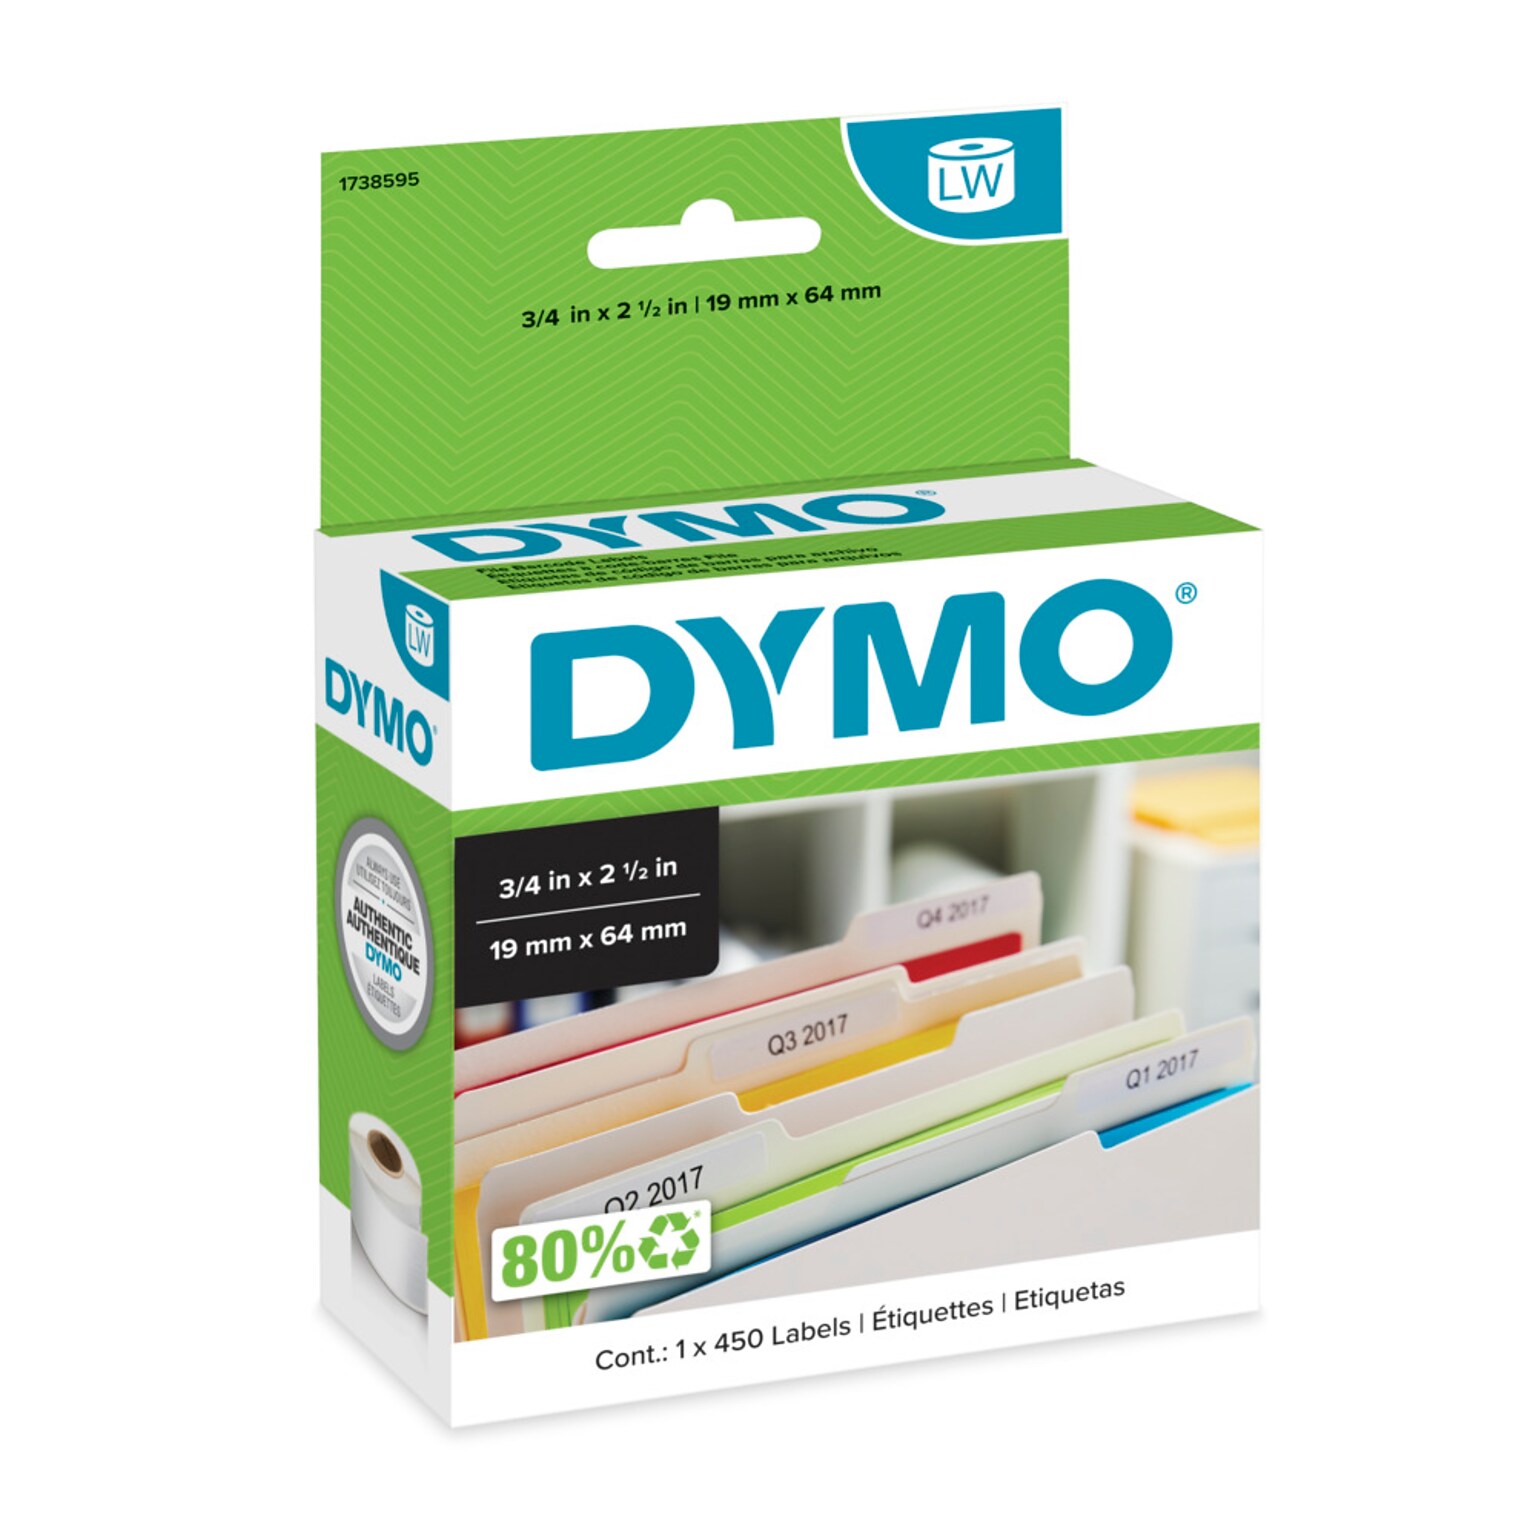 DYMO LabelWriter 1738595 File Barcode Labels, 2-1/2 x 3/4, Black on White, 450 Labels/Roll (1738595)